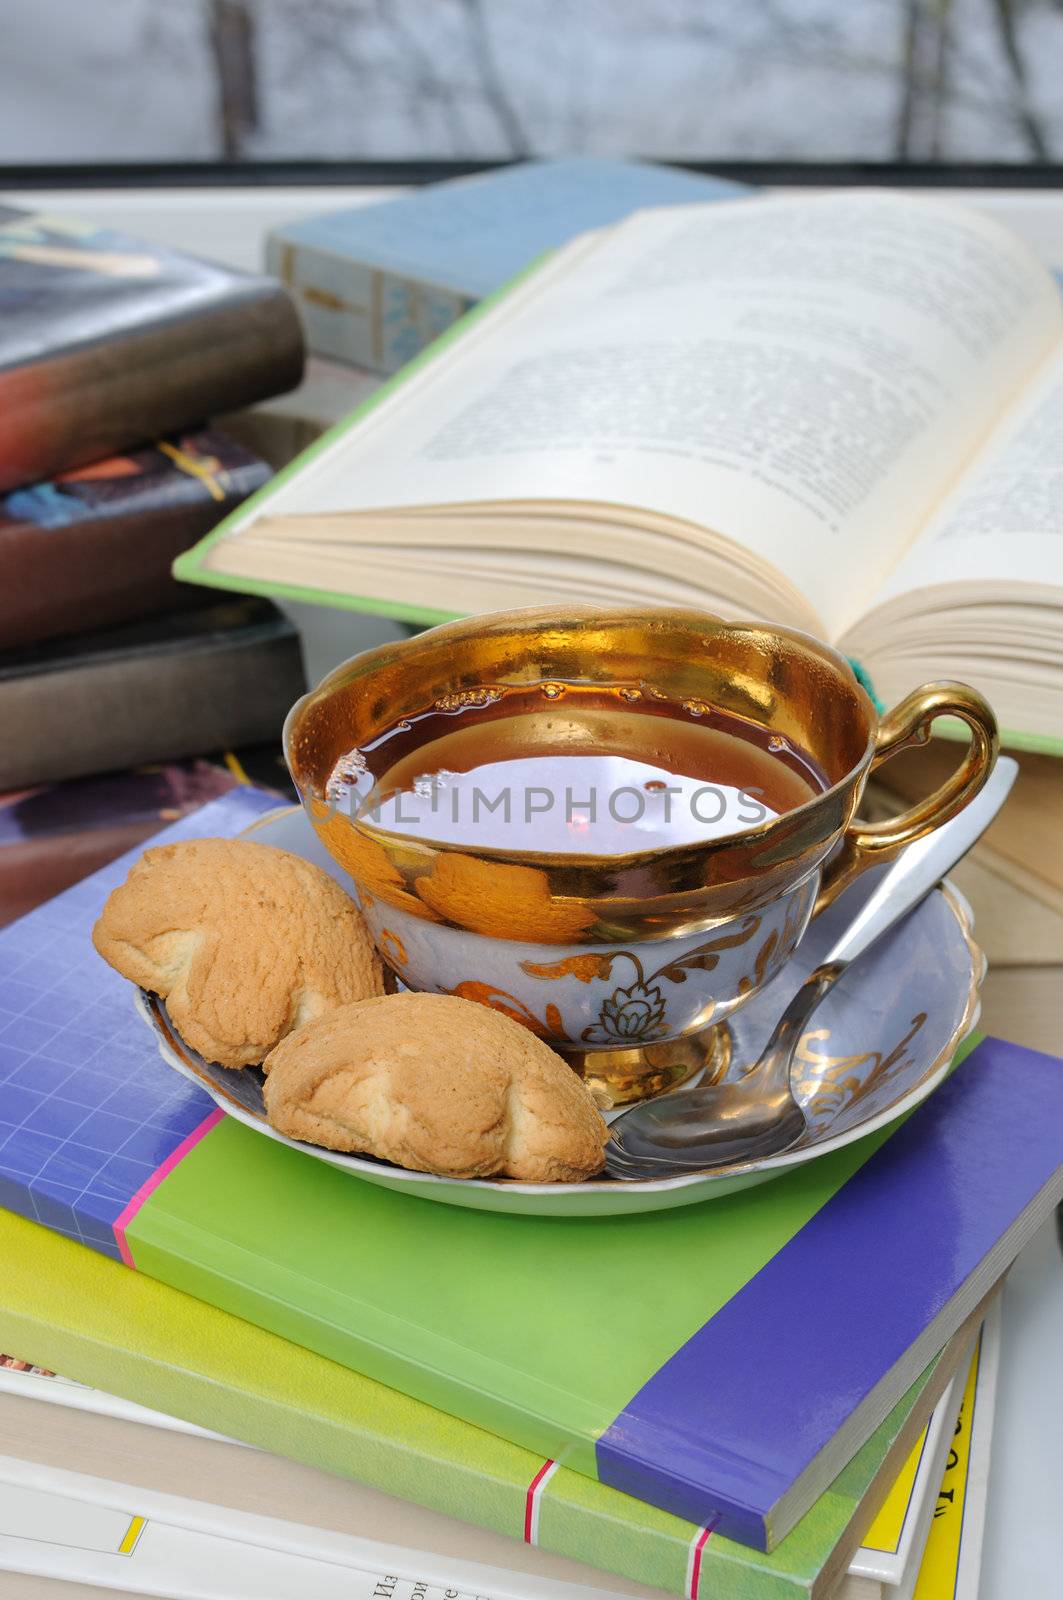 A cup of tea and biscuits on the table with books